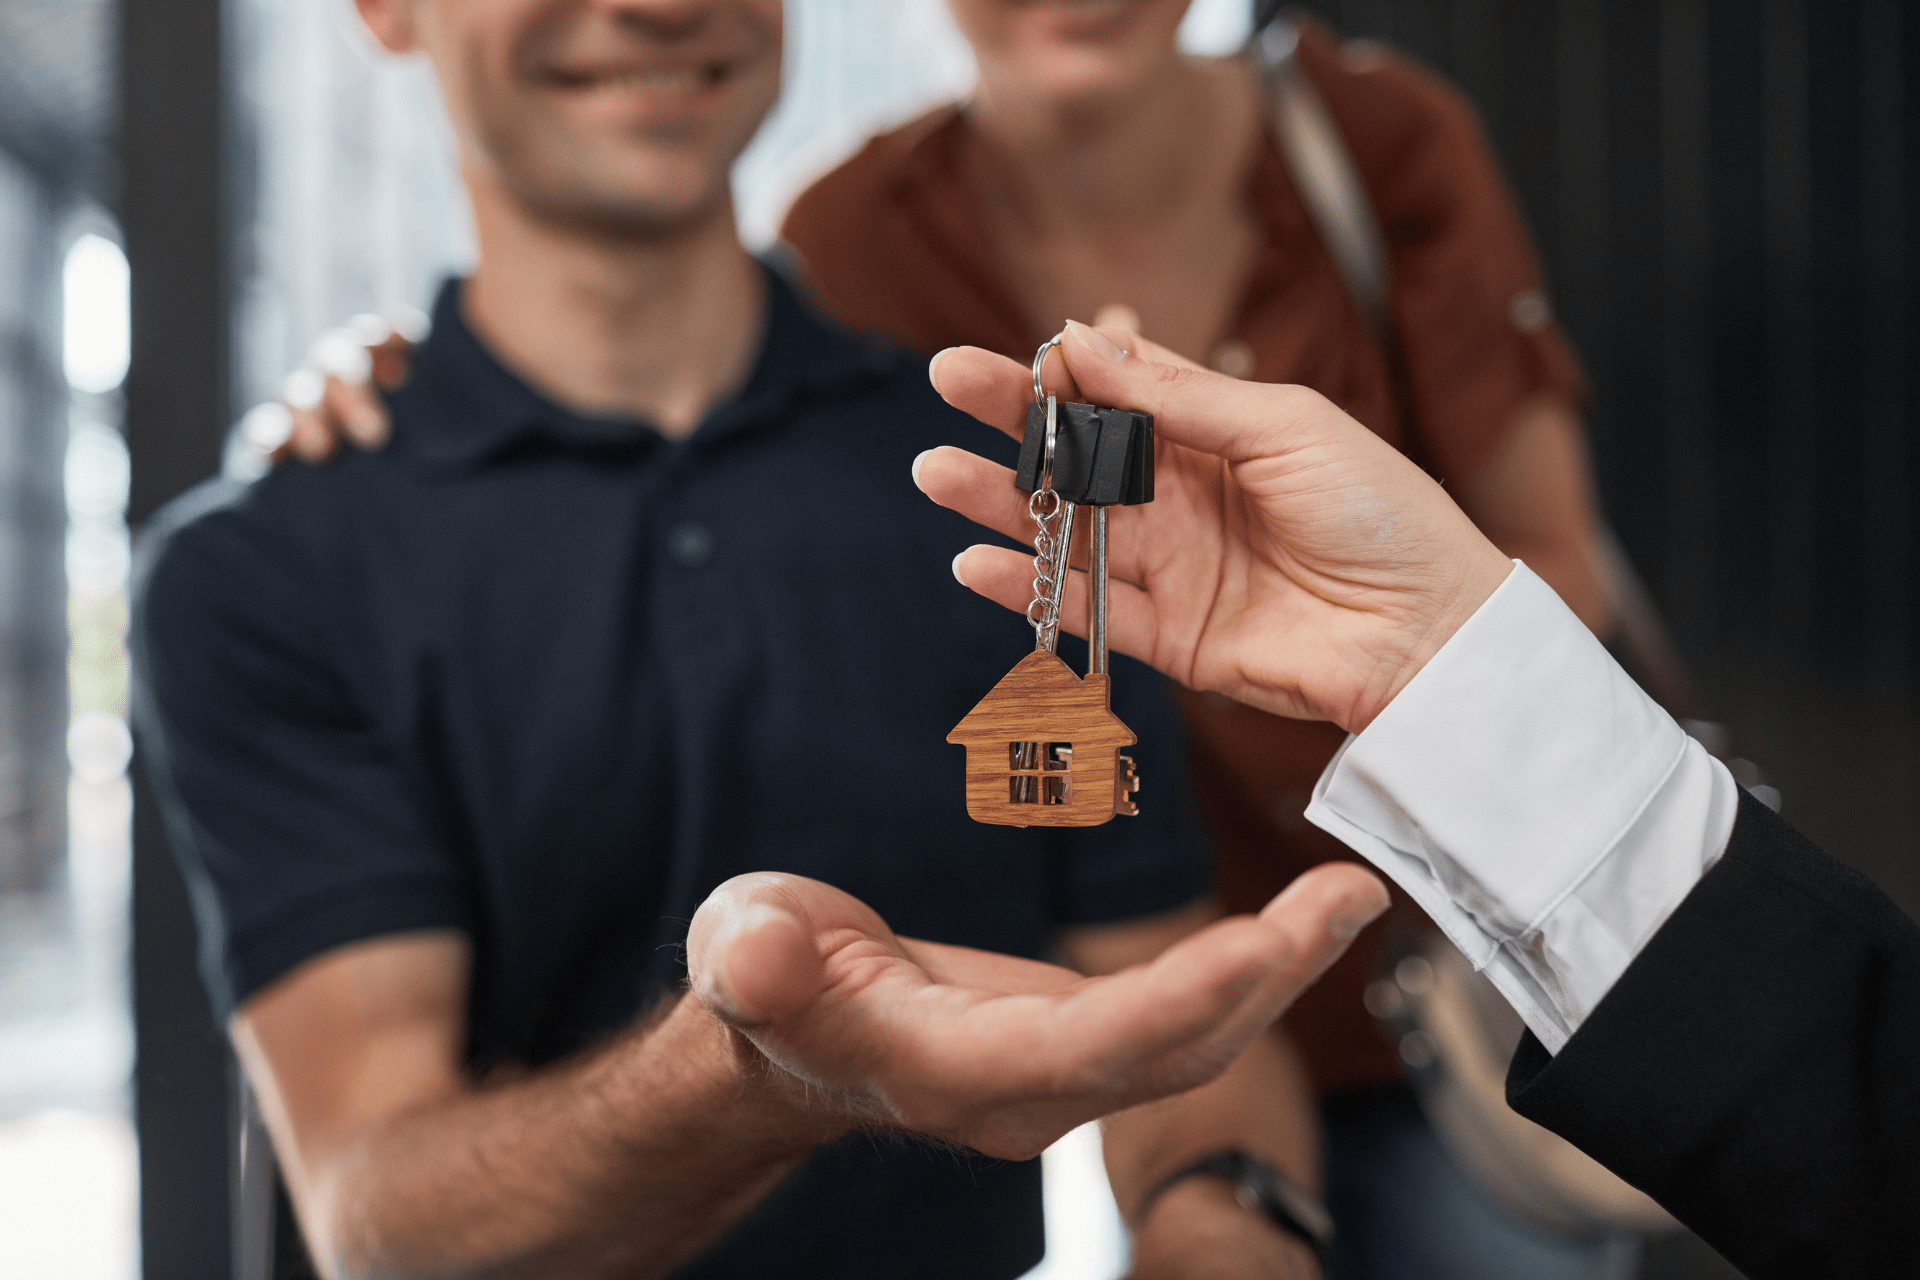 Image of a man receiving a house key illustrates how CLTS can support immigrant housing